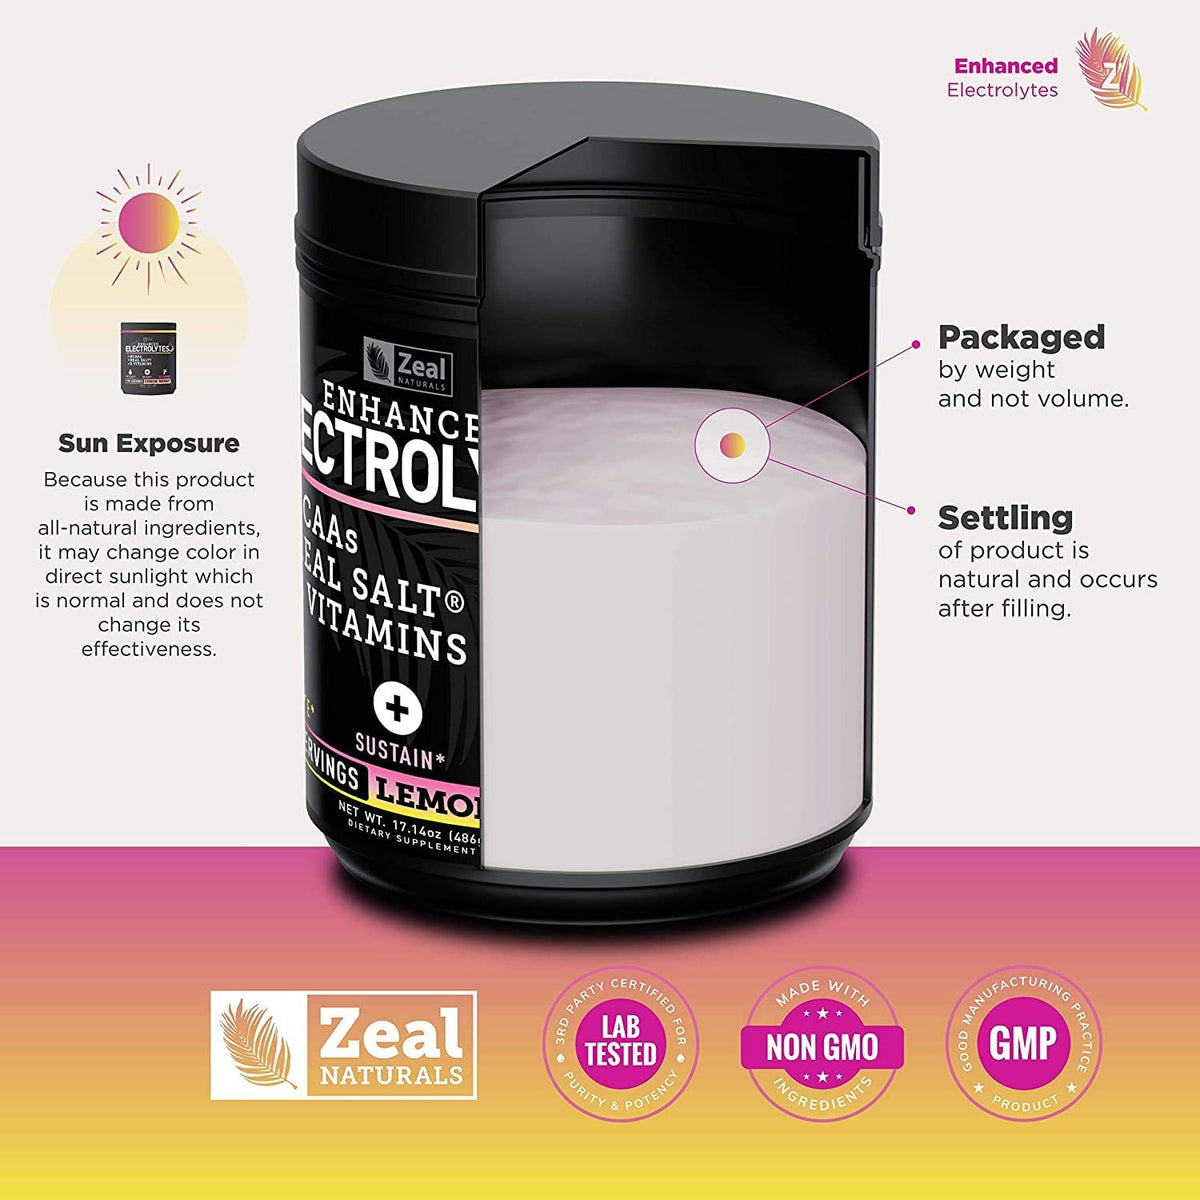 Product cutaway infographic showing powder settling after filling and not to worry as it&#39;s packaged by weight, not volume. Powder is sun sensitive due to all-natural ingredients and may change color in direct sunlight.